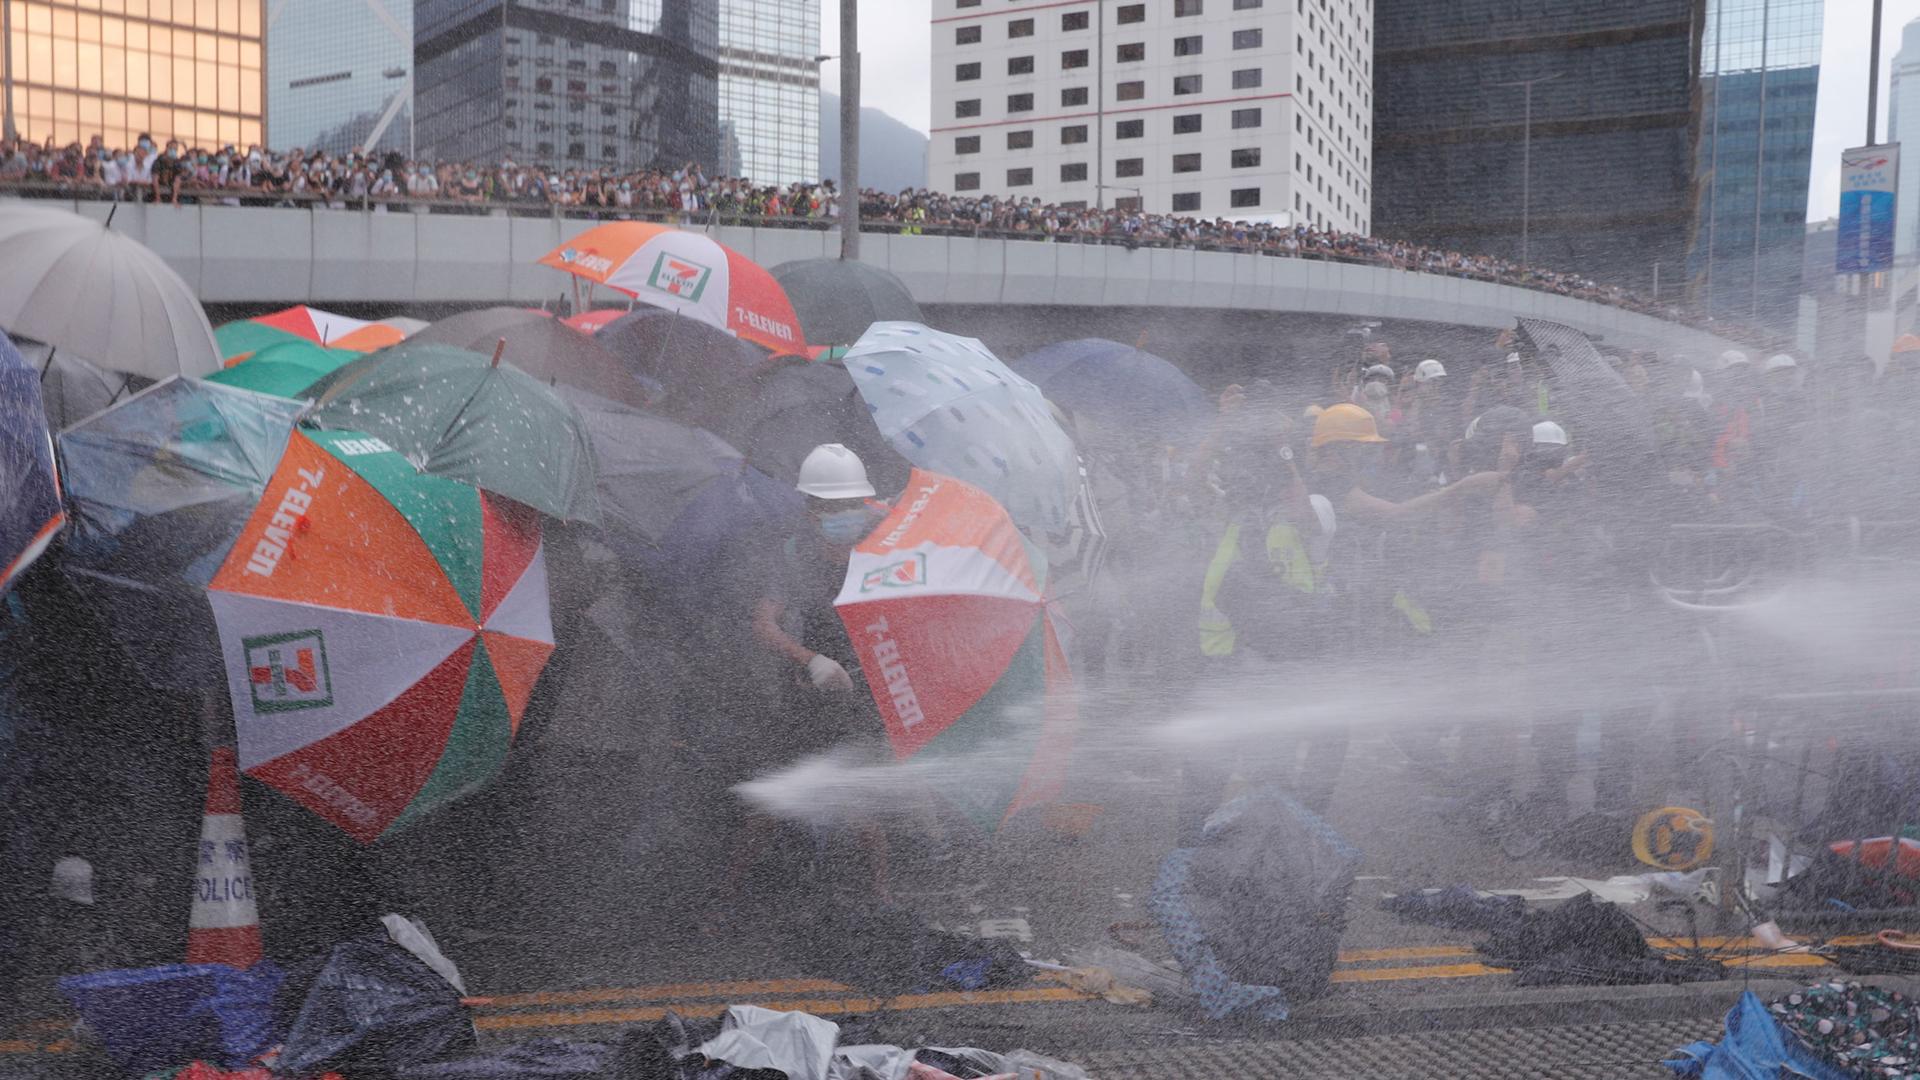 A group of protesters are shown with their umbrellas pointed down to protect themselves from water being shot across the frame of the photograph.